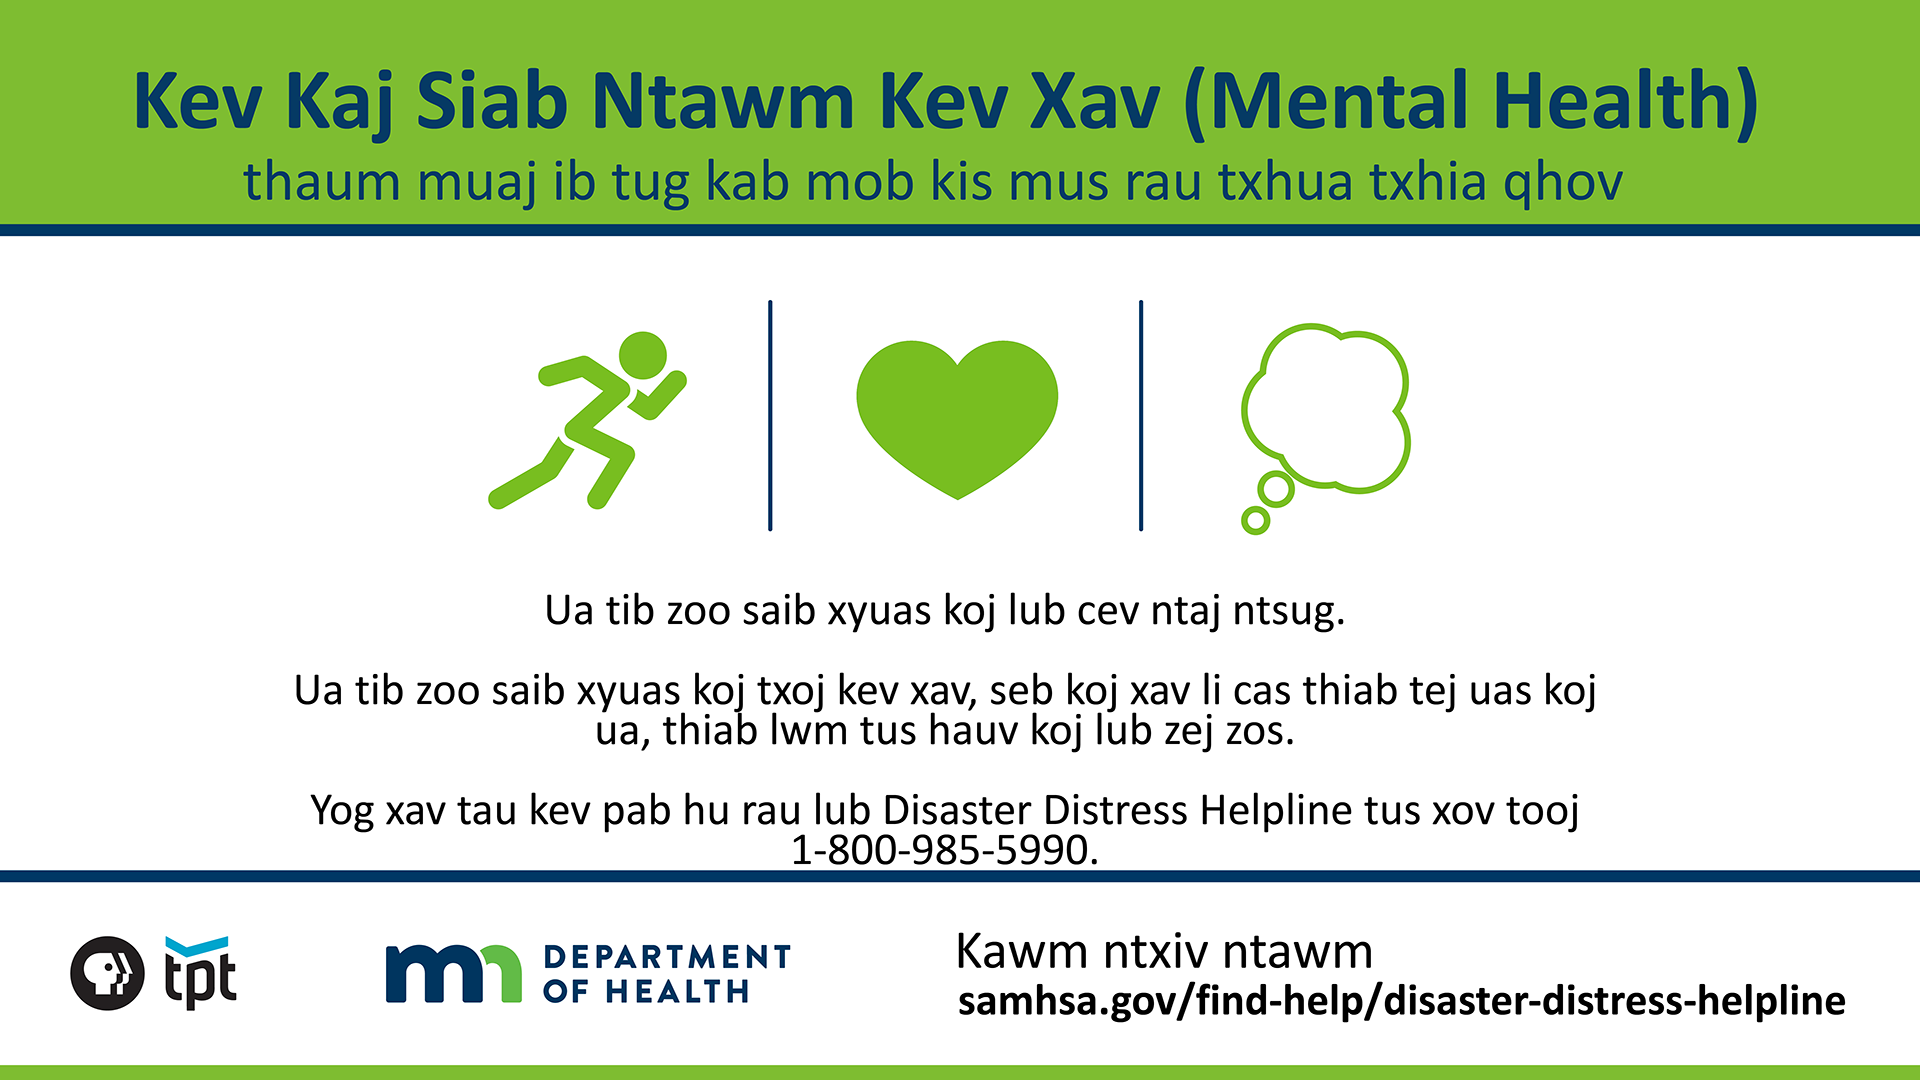 Mental health message in Hmong